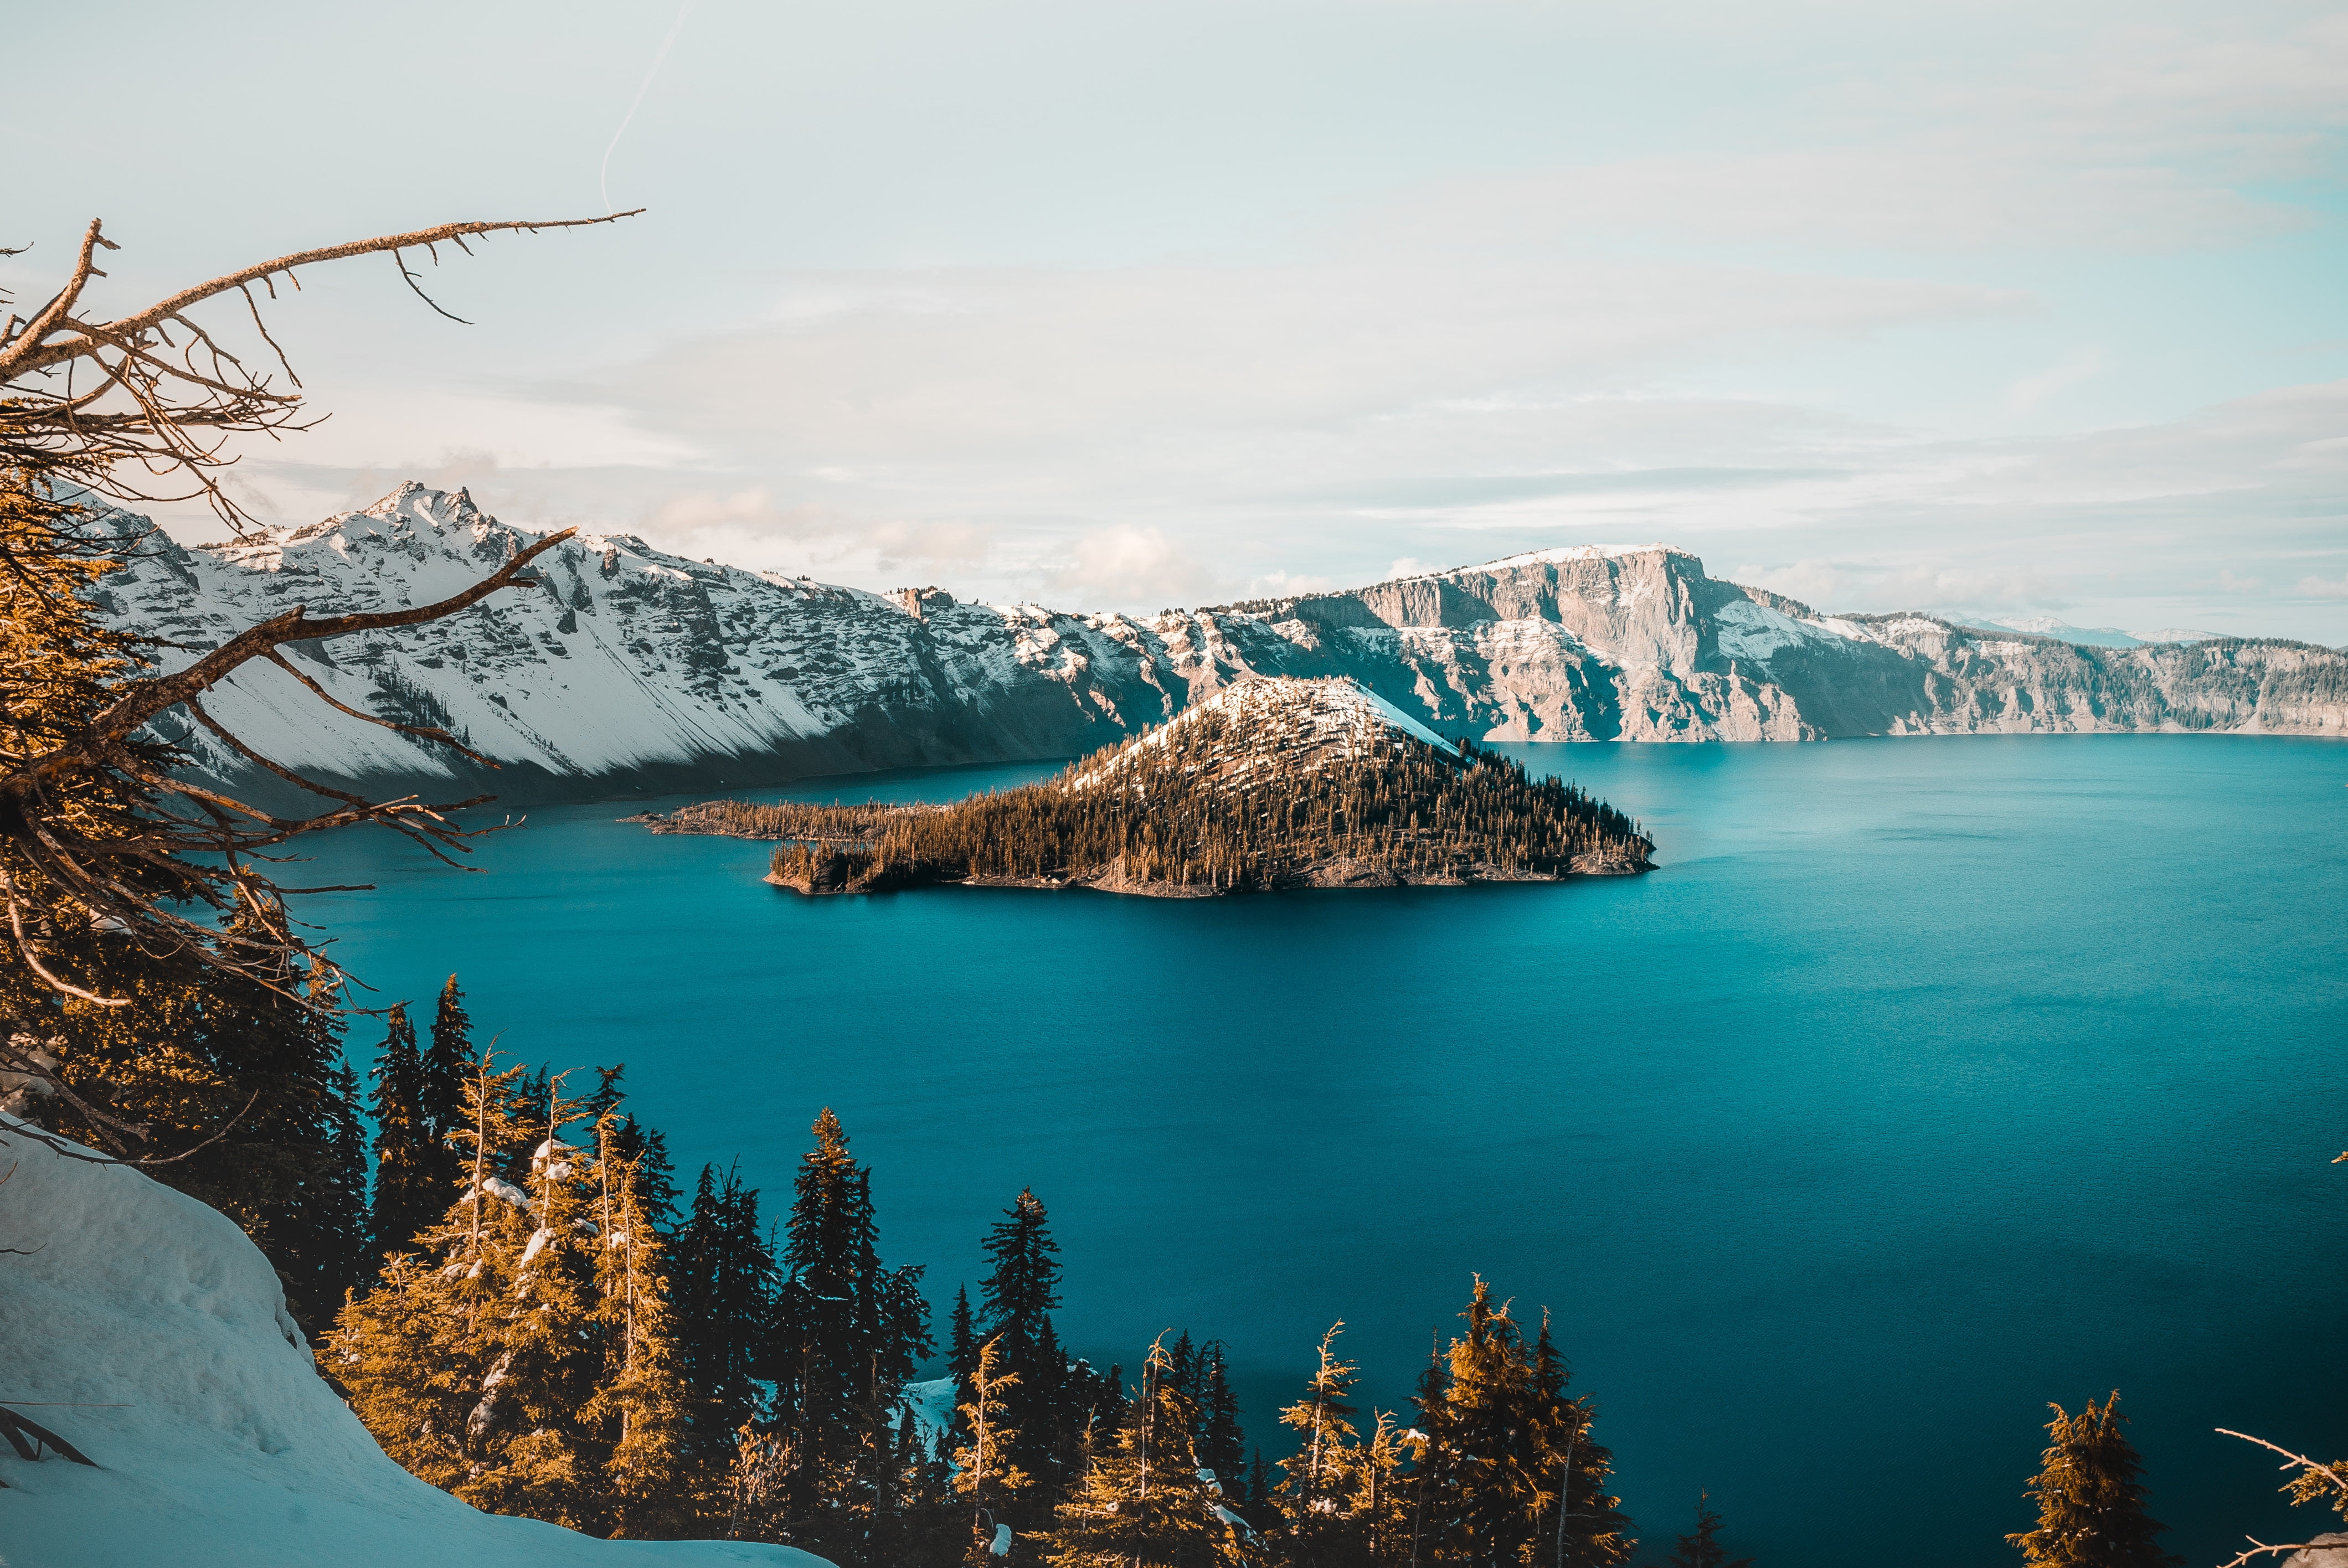 blue body of water, landscape, nature, crater lake, lake